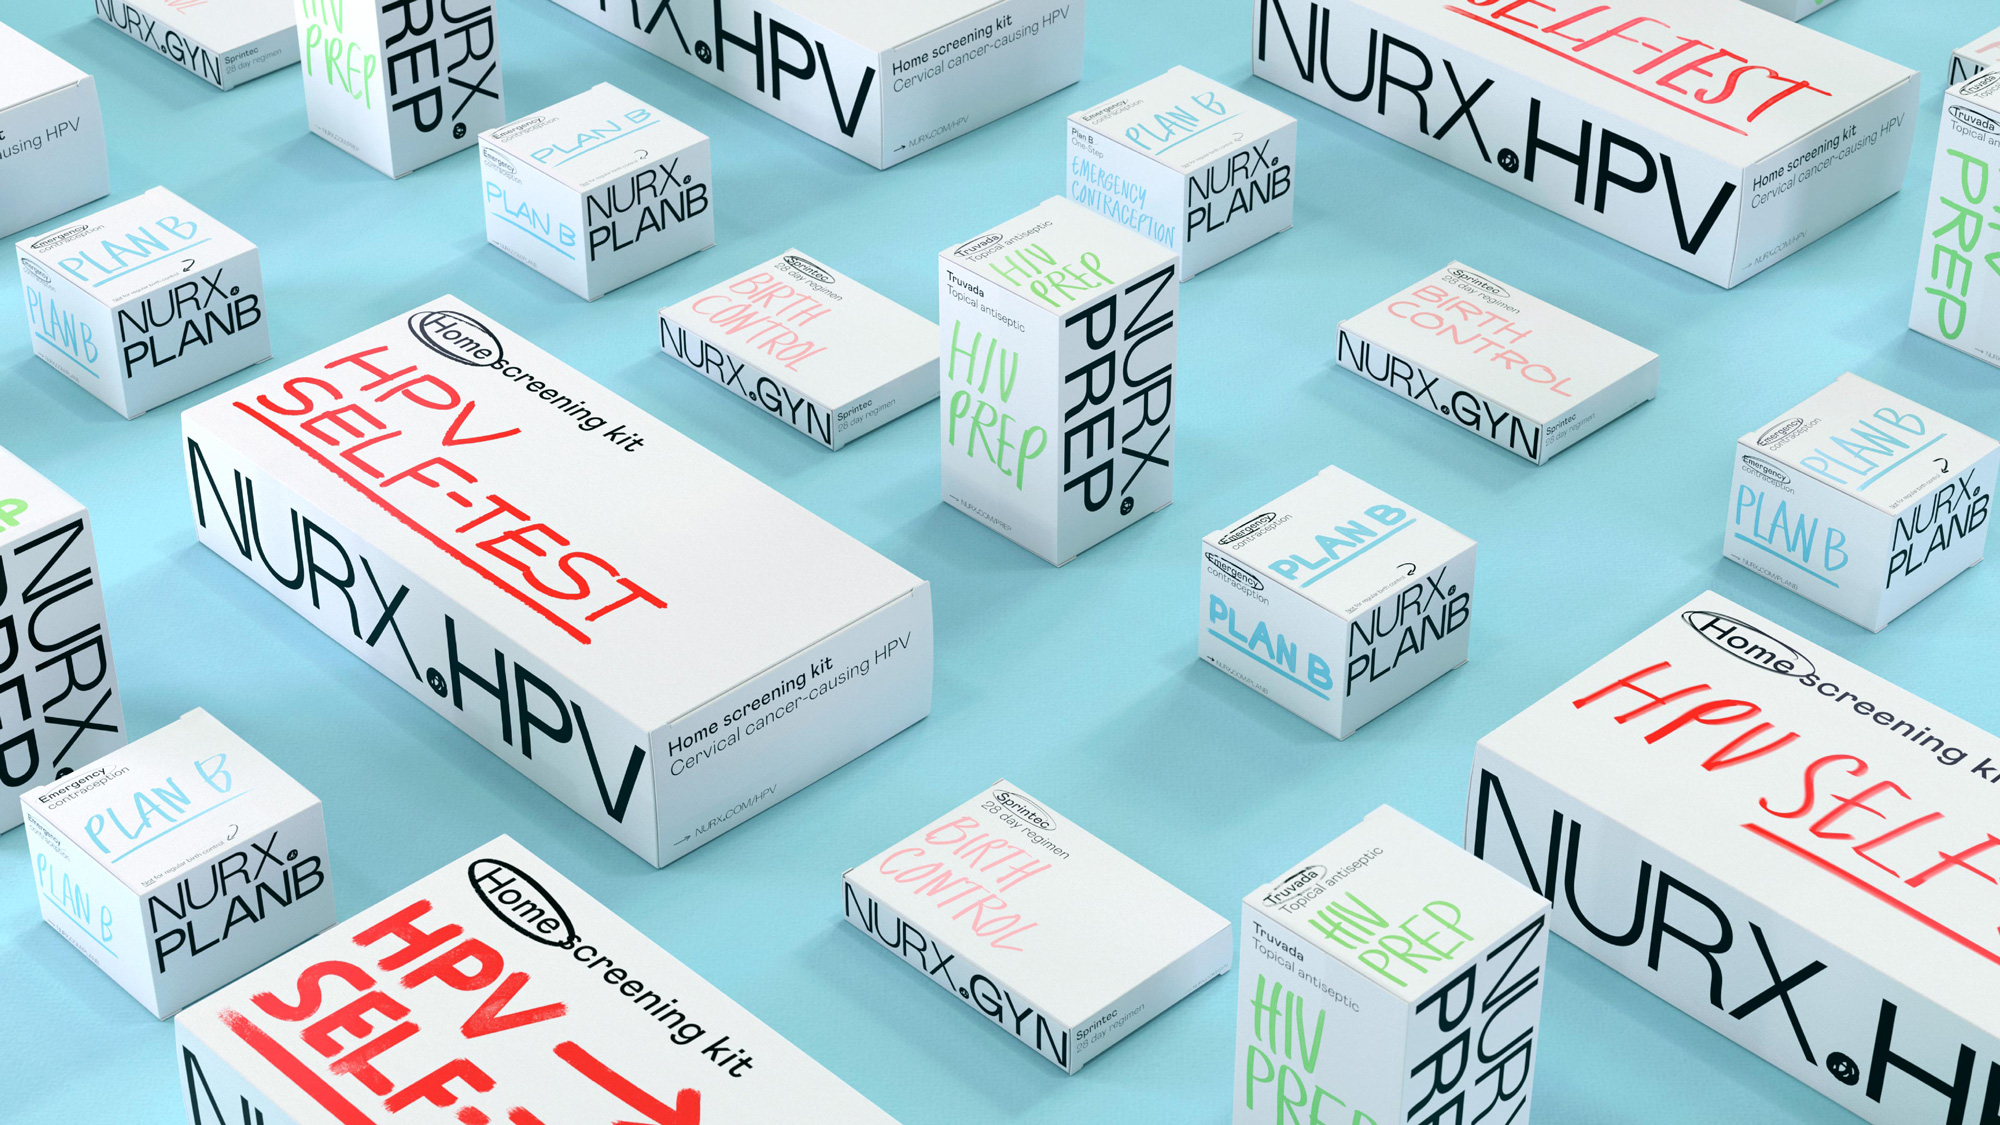 New Logo and Identity for Nurx by Koto